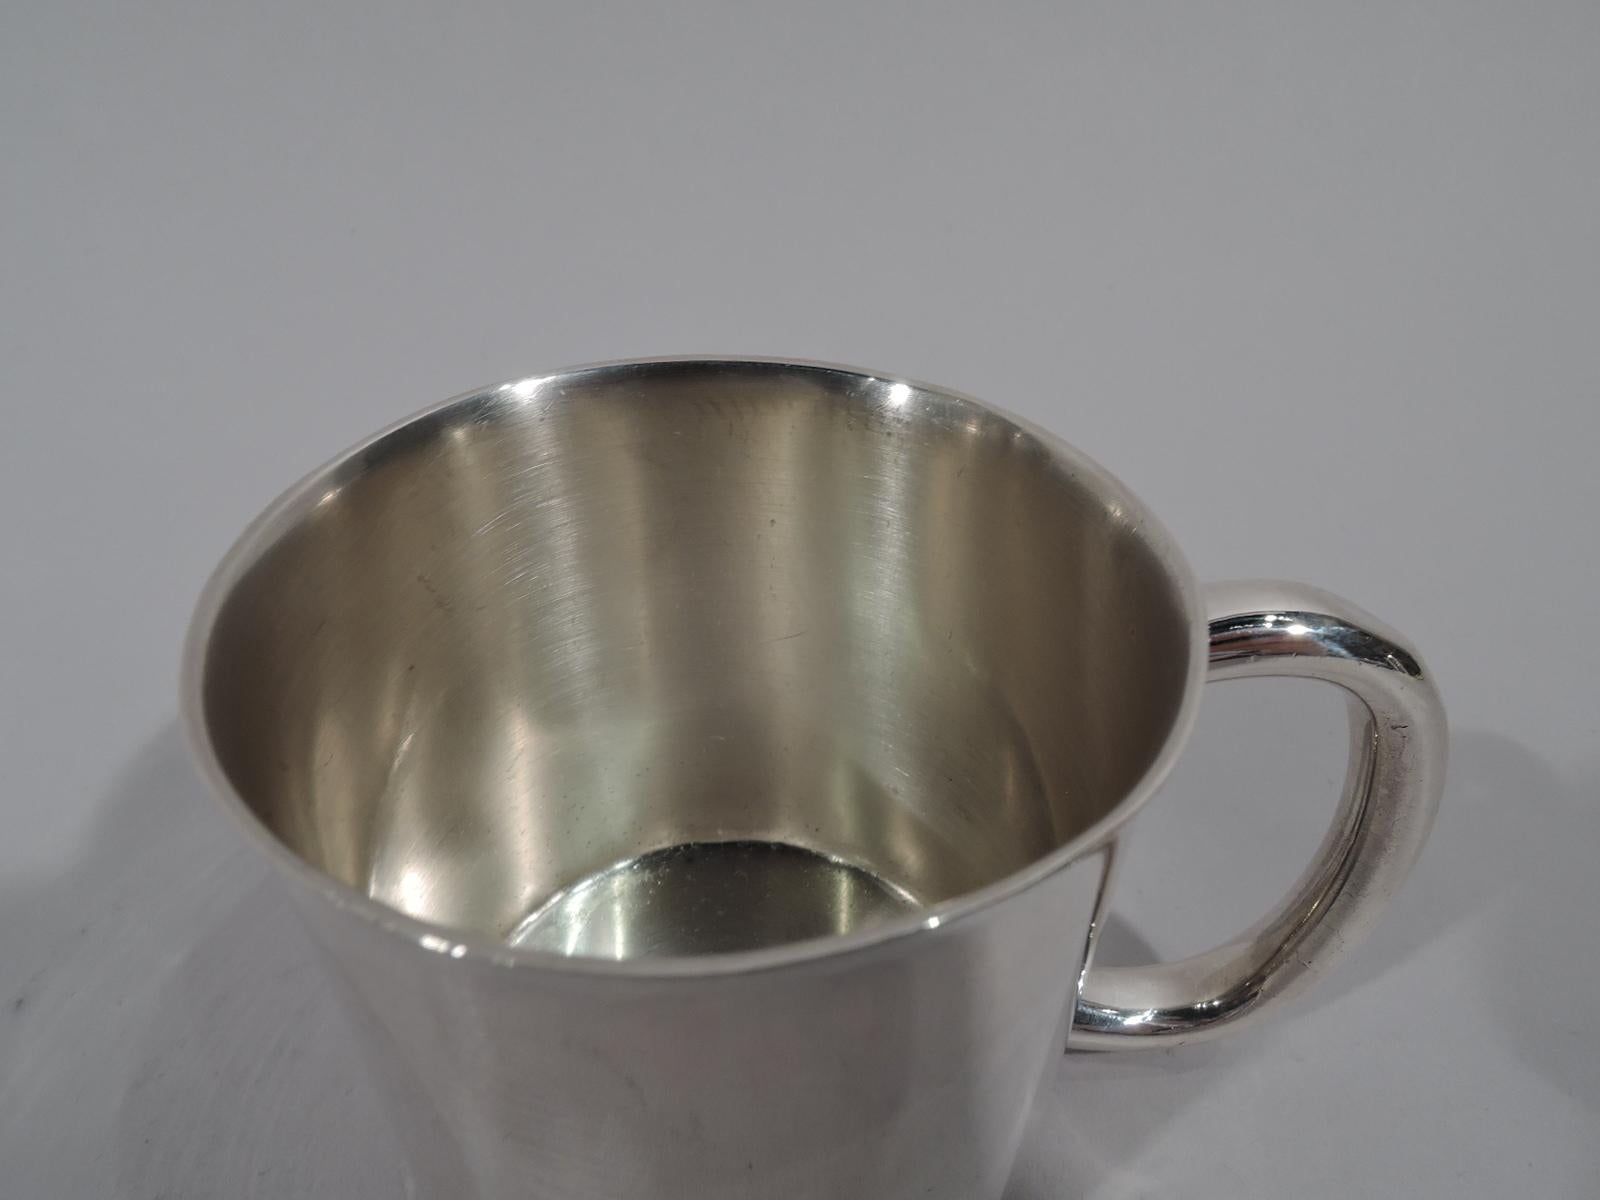 American Mid-Century Modern sterling silver baby cup. Made by Towle in Newburyport, Mass. Drum form with gently flared rim and thick c-scroll handle. Lots of room for engraving. Fully marked and numbered 7871. Weight: 3.4 troy ounces.